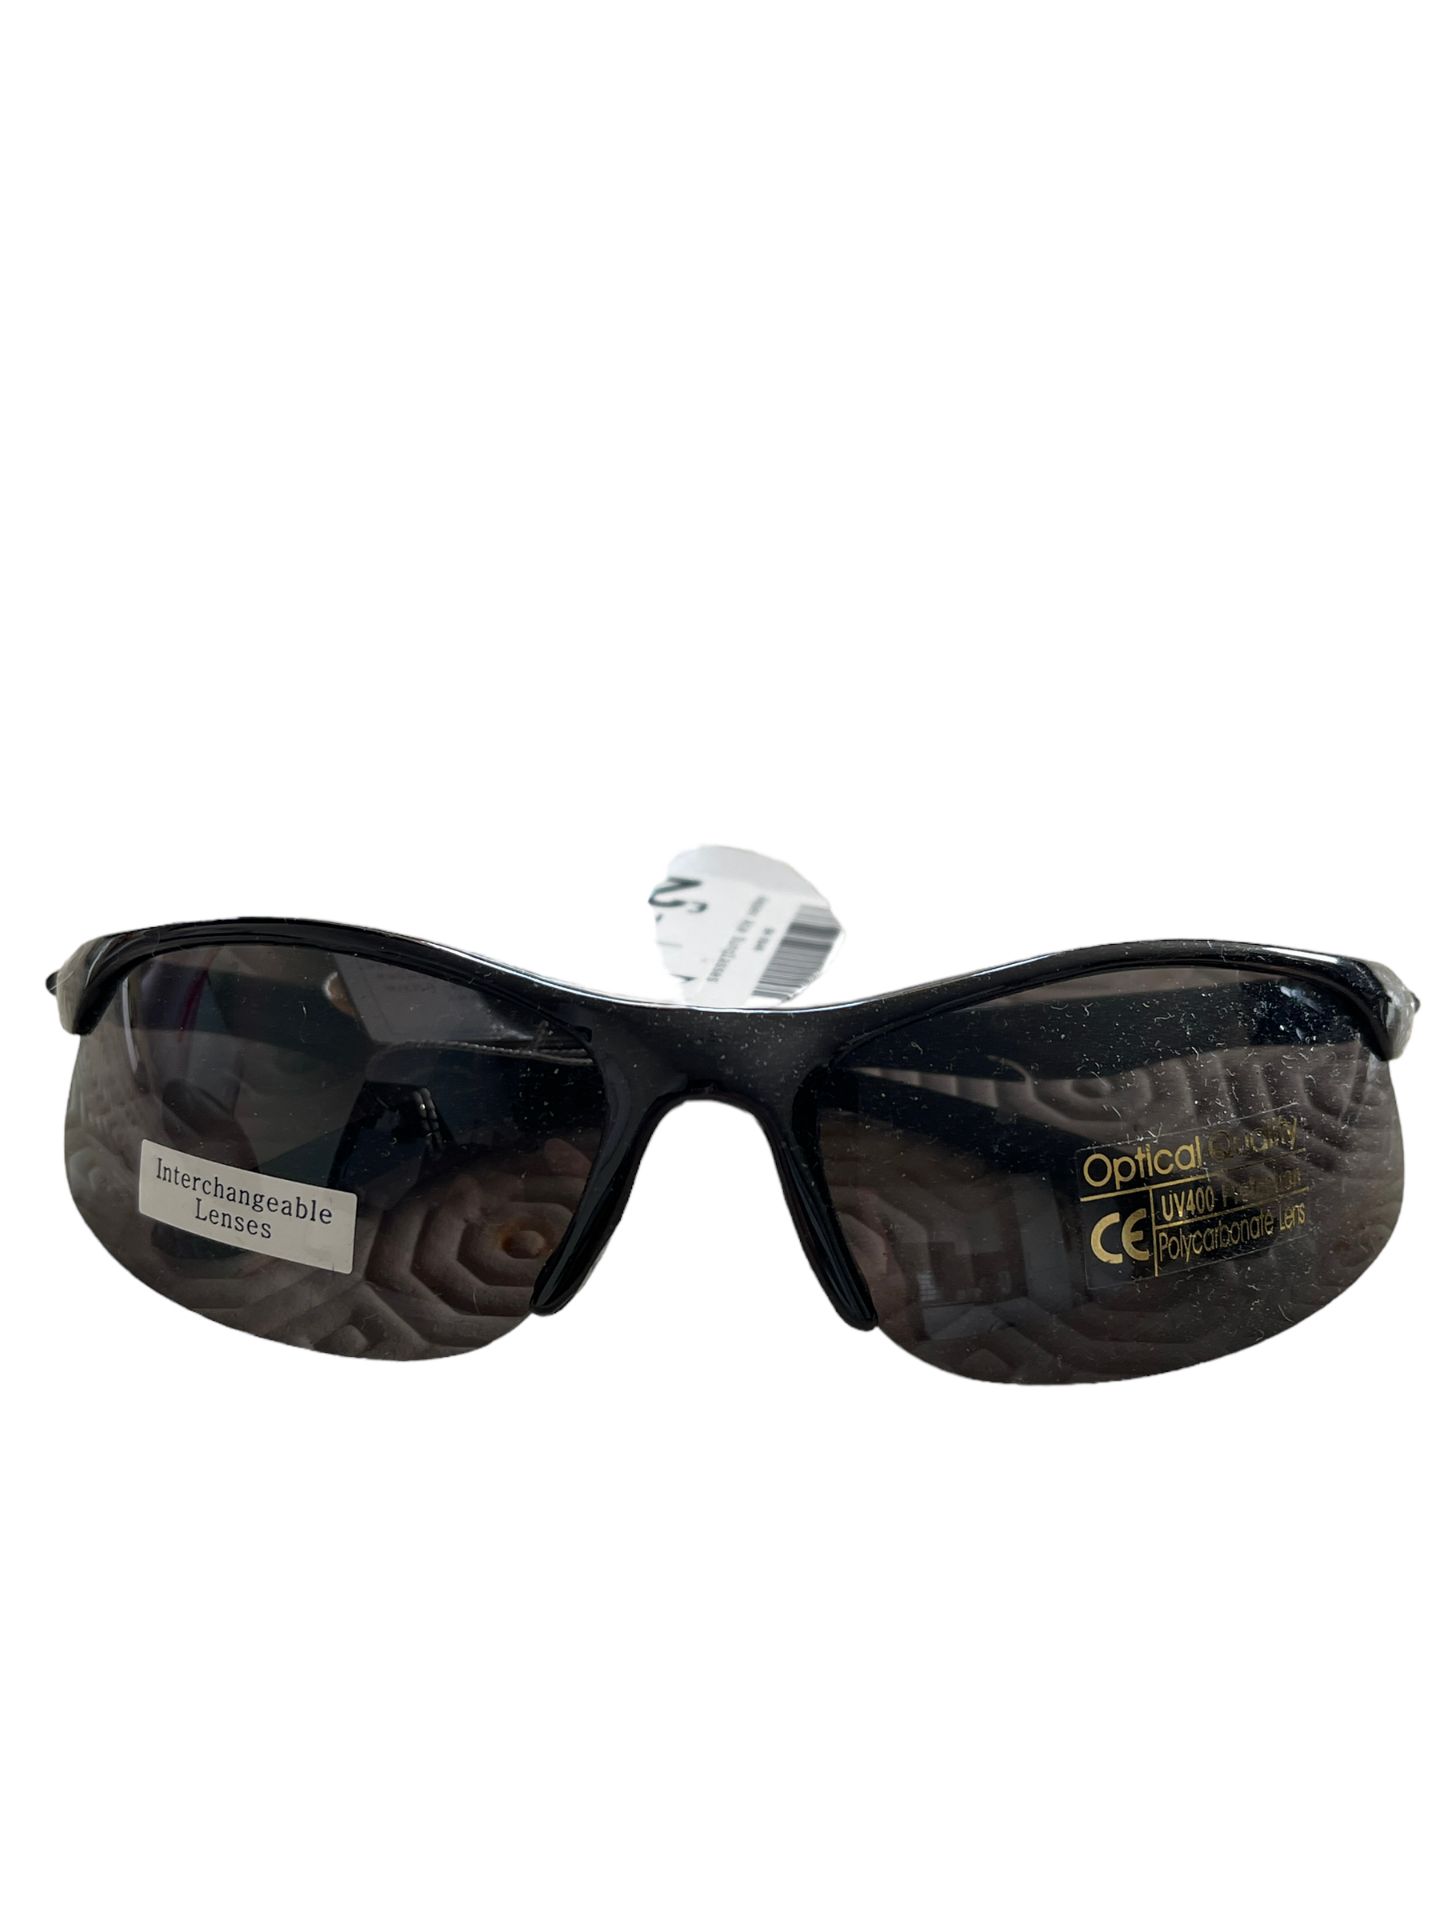 Apex Ace Glasses with case RR£38.00 surplus stock - Image 3 of 3